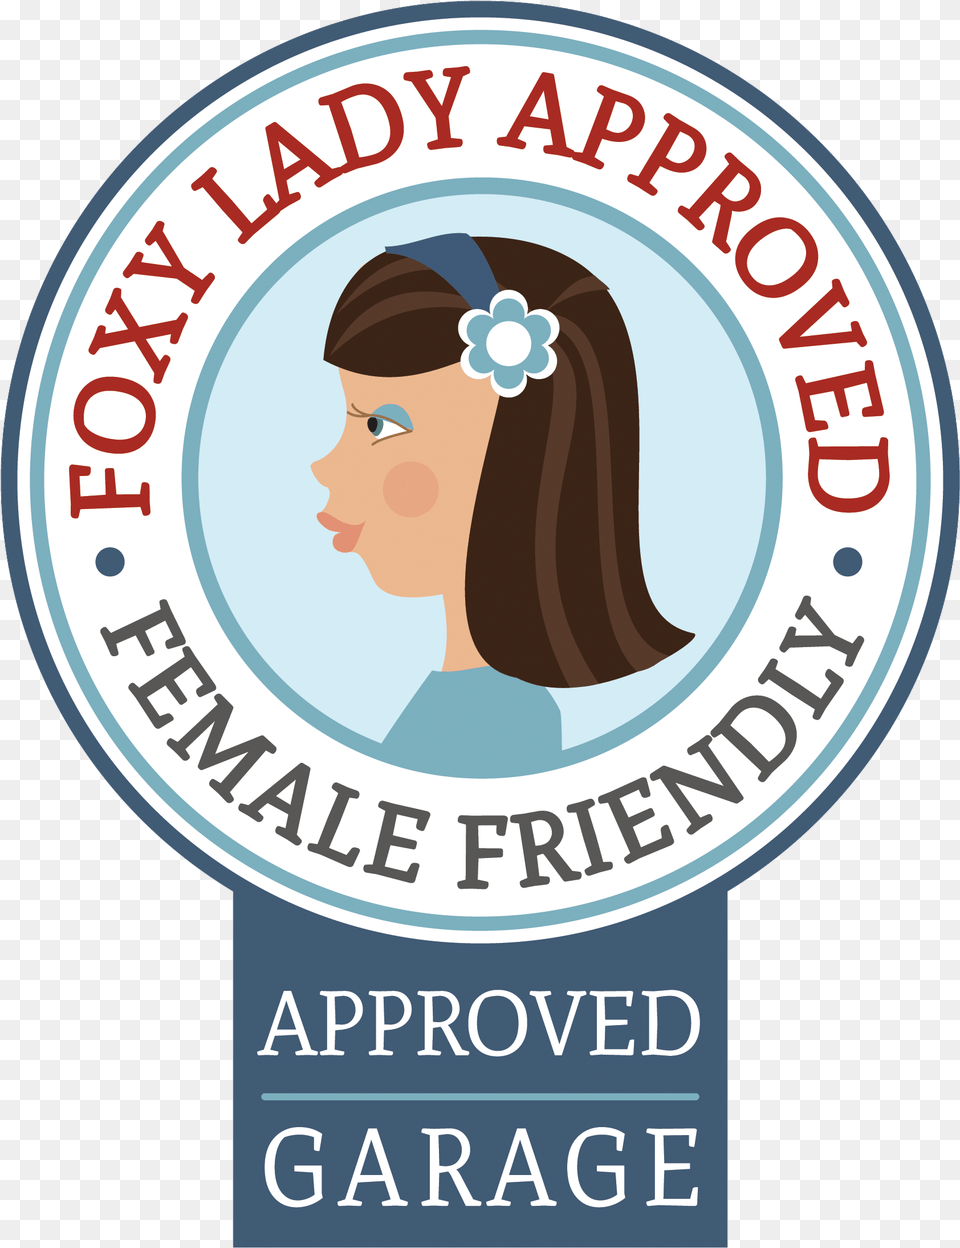 Foxy Lady Female Friendly Garages 1st Stop Cars Foxy Lady Approved Dealer Logo, Advertisement, Poster, Adult, Person Png